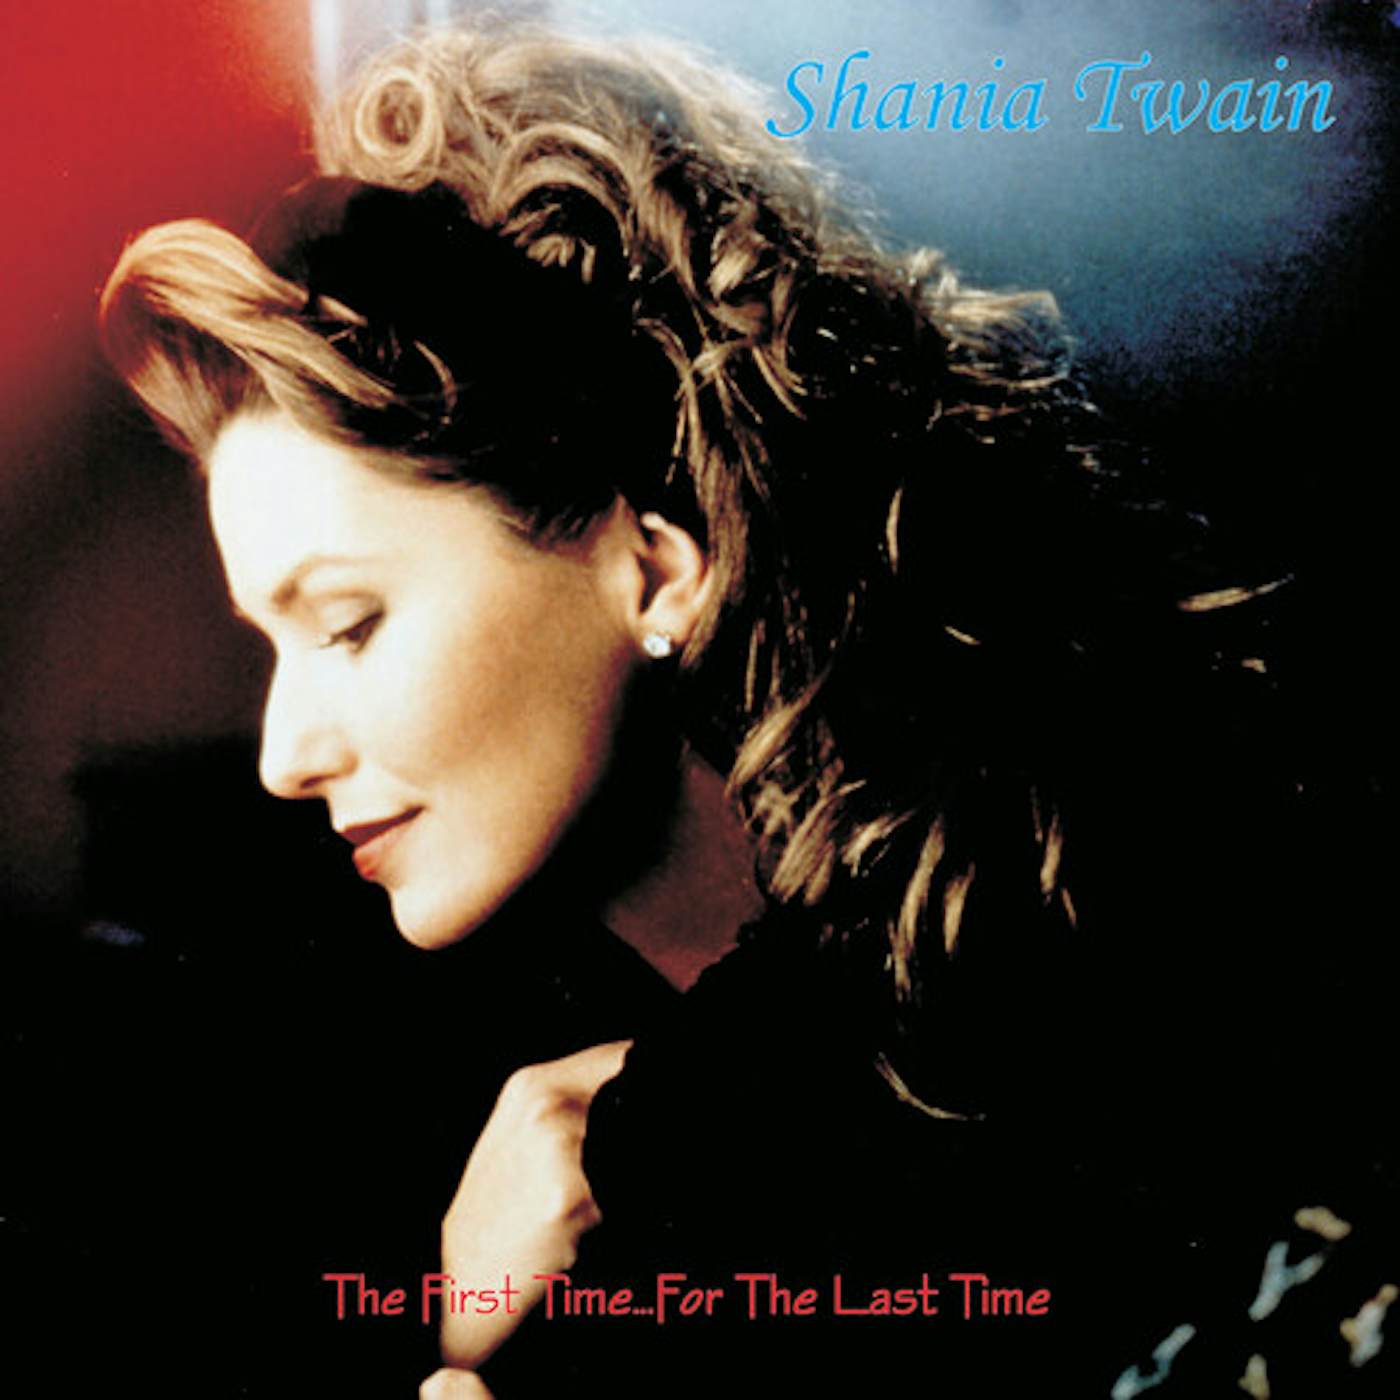 Shania Twain FIRST TIME FOR THE LAST TIME (CANADIAN EDITION) CD